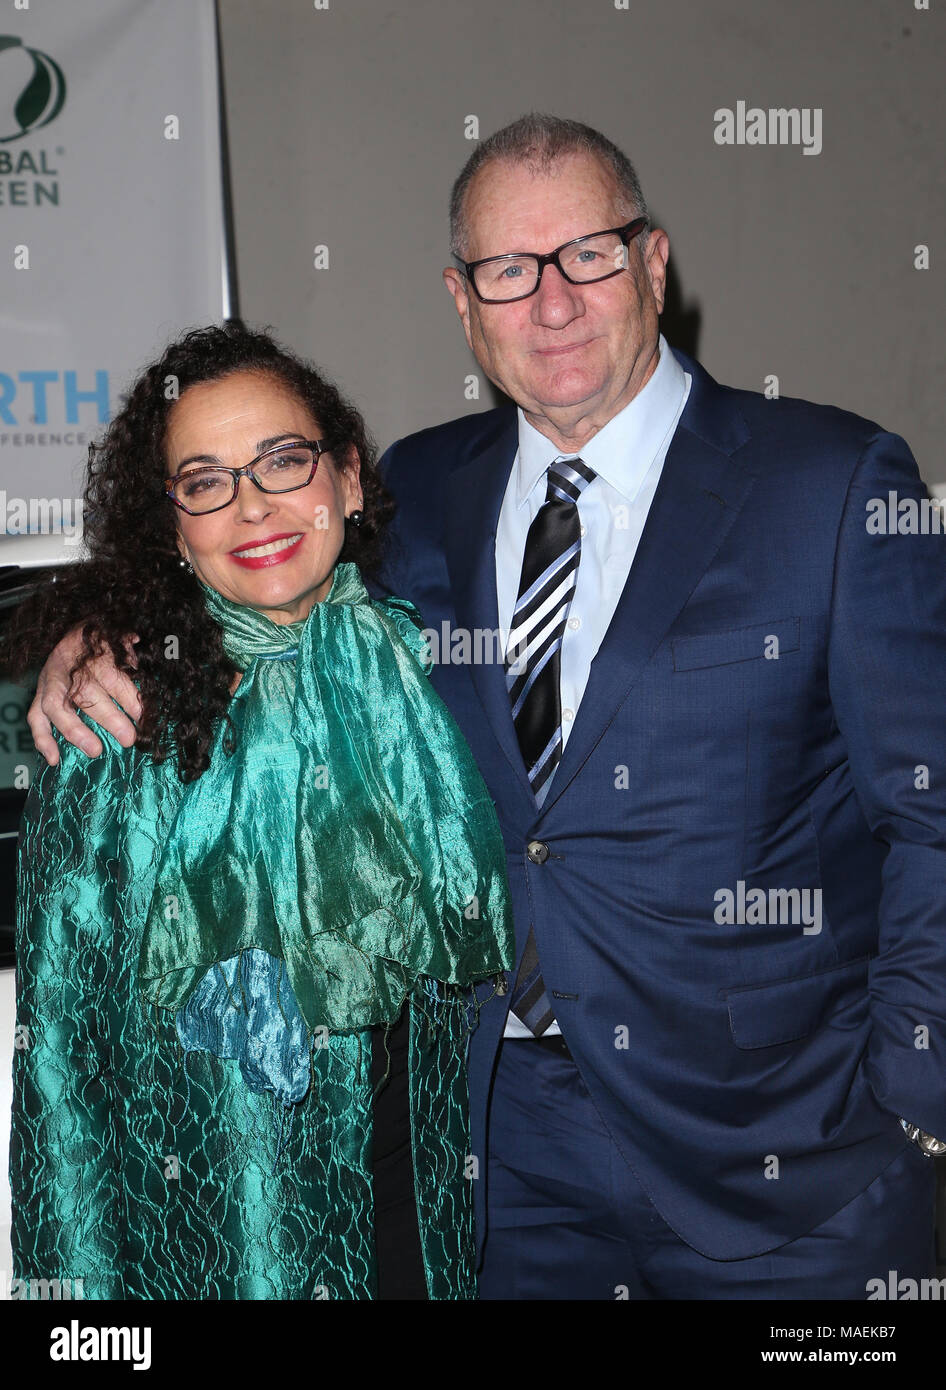 Global Green’s Annaul Pre-Oscar Gala 2018 held at NeueHouse Hollywood - Arrivals  Featuring: Catherine Rusoff, Ed O'Neill Where: Hollywood, California, United States When: 28 Feb 2018 Credit: FayesVision/WENN.com Stock Photo